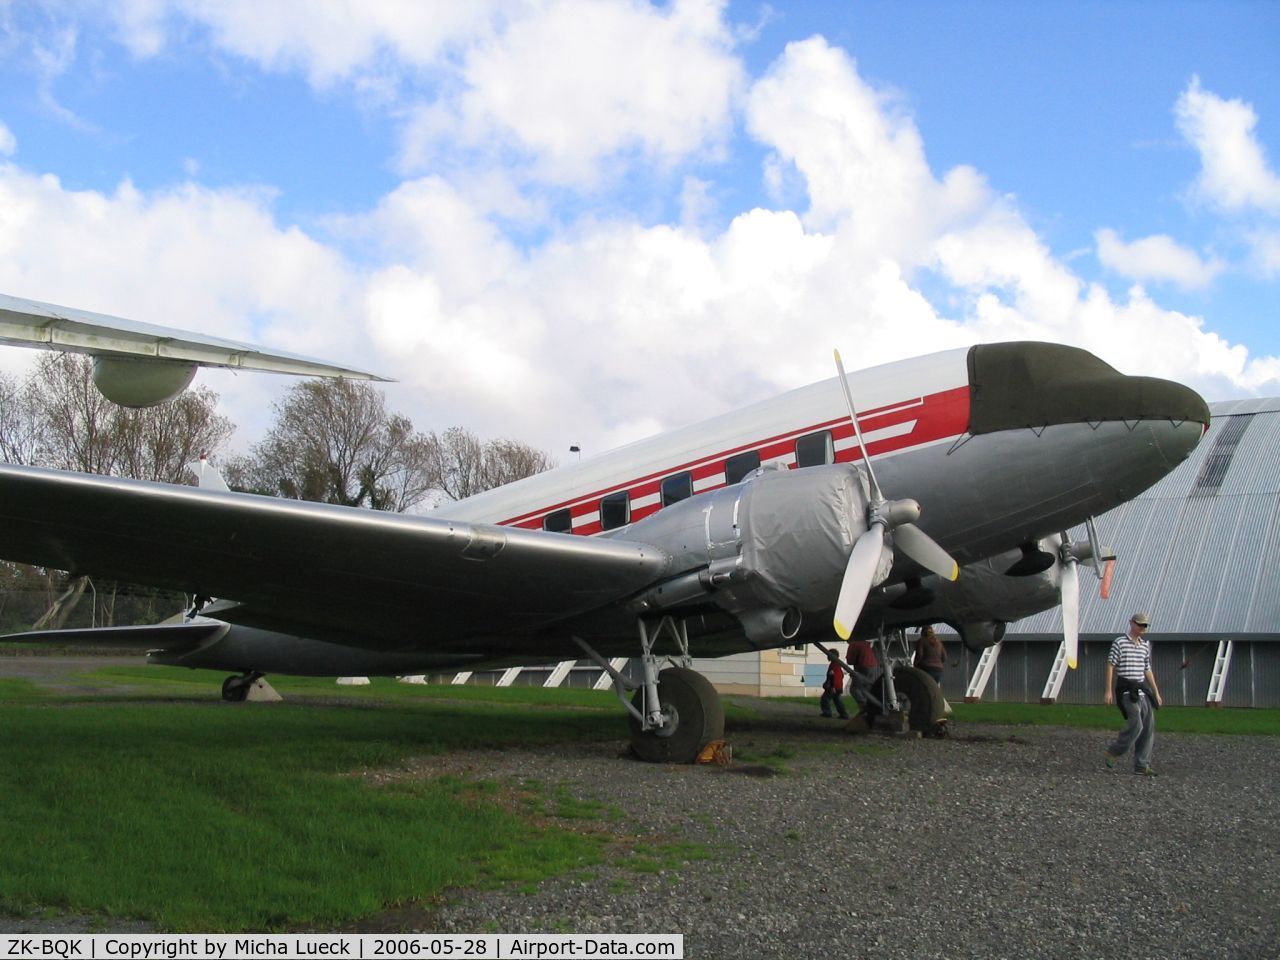 ZK-BQK, 1944 Douglas C-47B Skytrain C/N 16567/33315, DC 3, preserved at the Museum of Transport and Technology (MOTAT) in Auckland, New Zealand